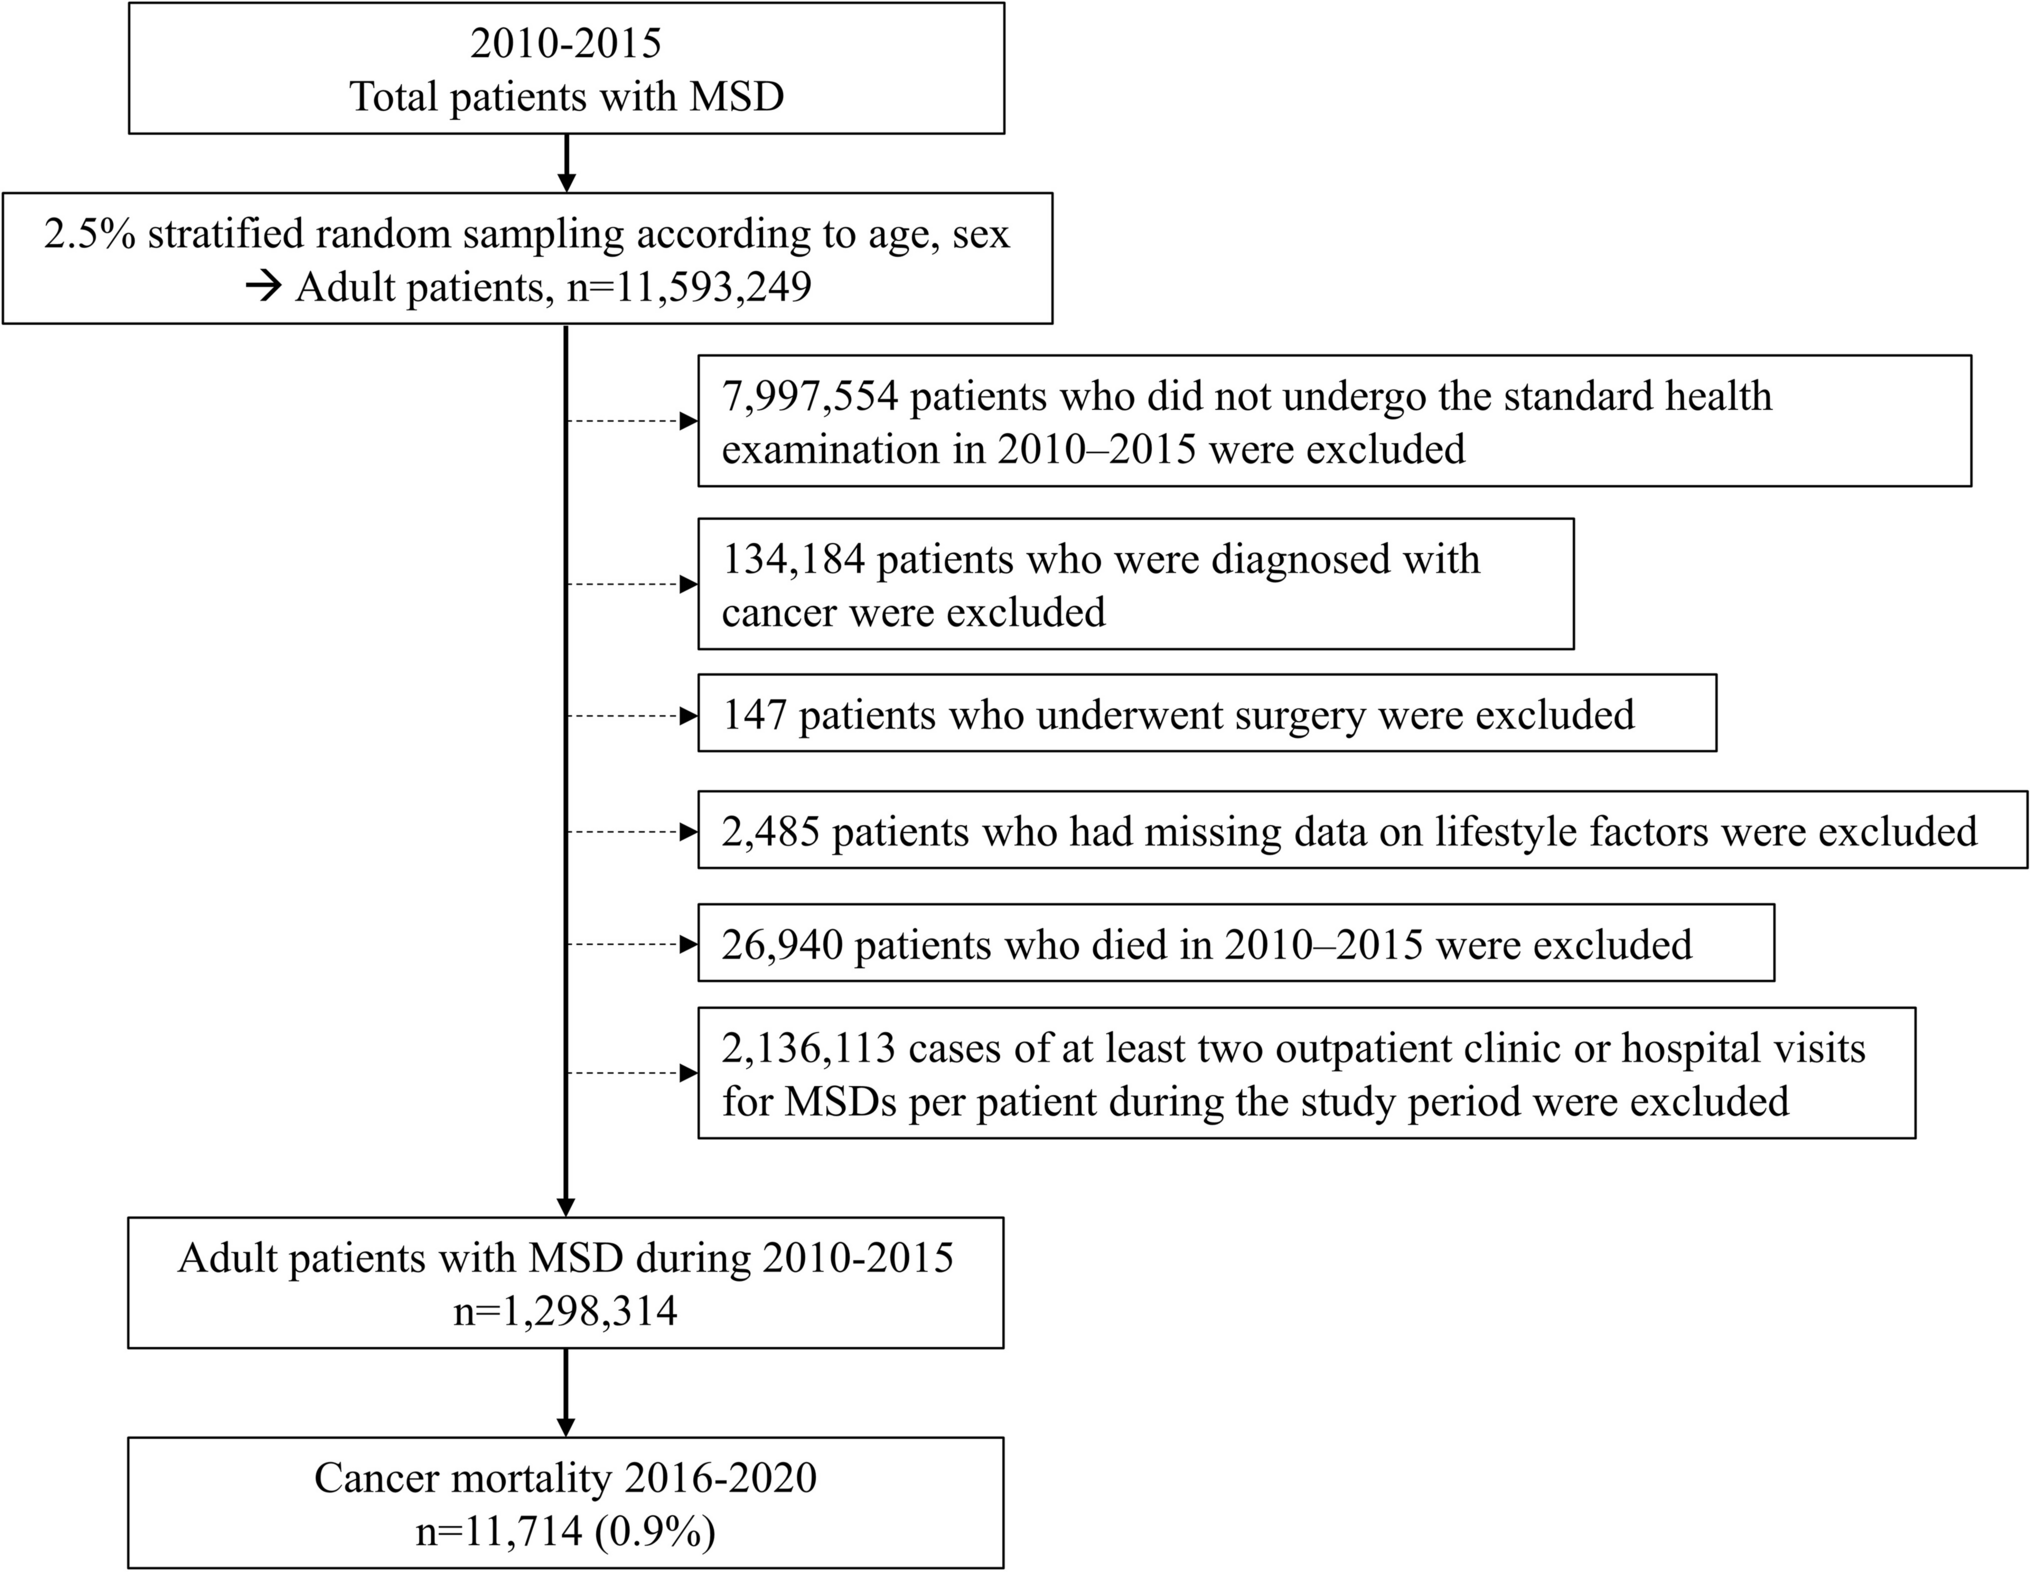 Insomnia disorder and cancer mortality in South Korea: a secondary analysis of musculoskeletal disease cohort